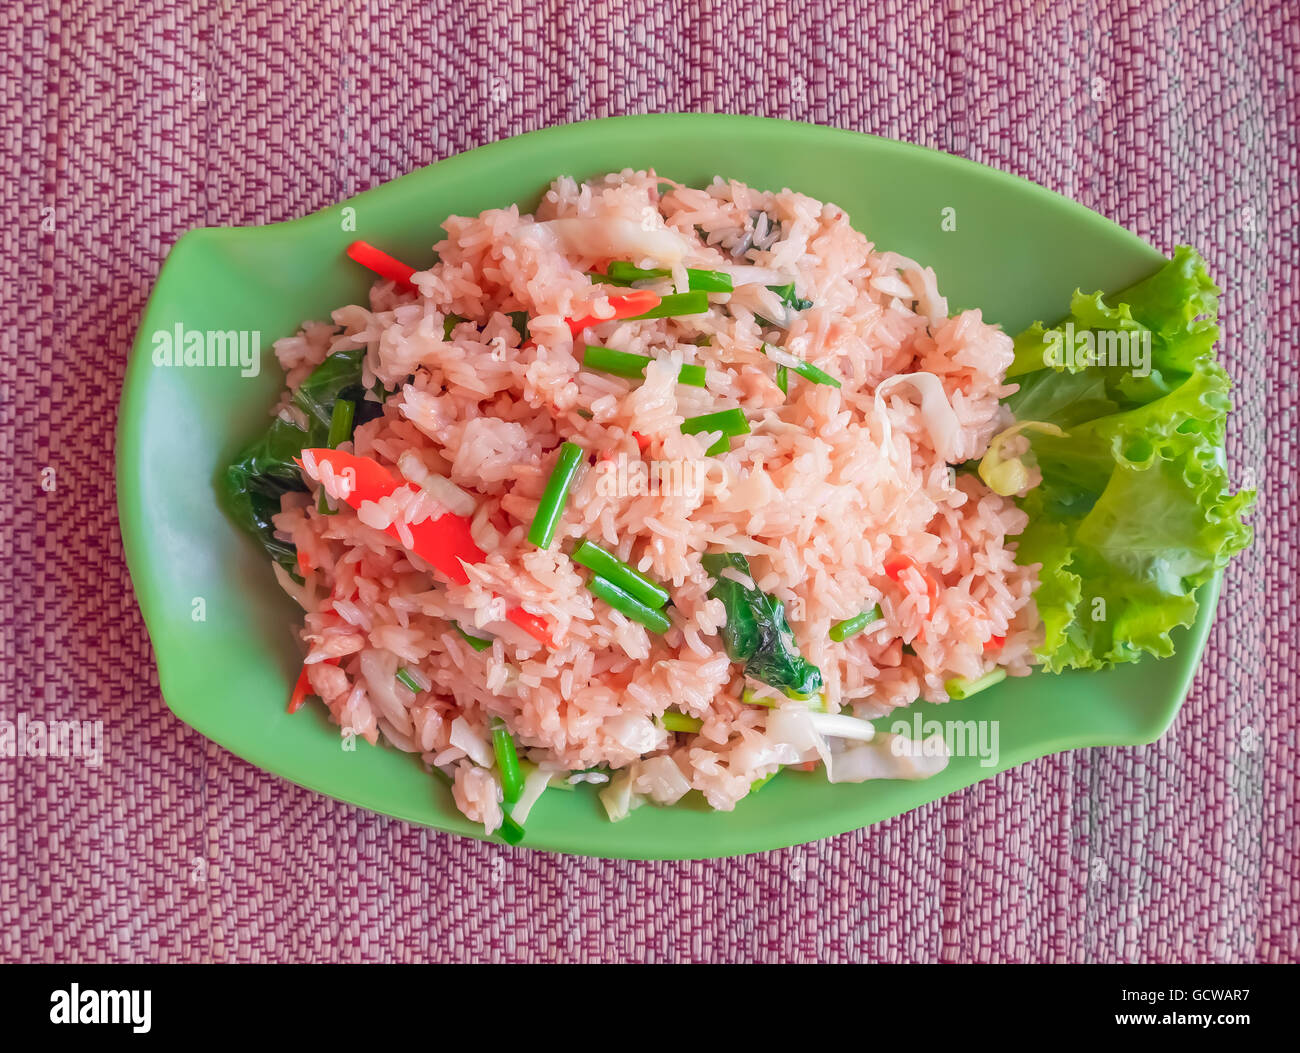 Fried rice with vegetables. Most popular food in Southeast Asia. Healthy vegetarian asian meal. Stock Photo